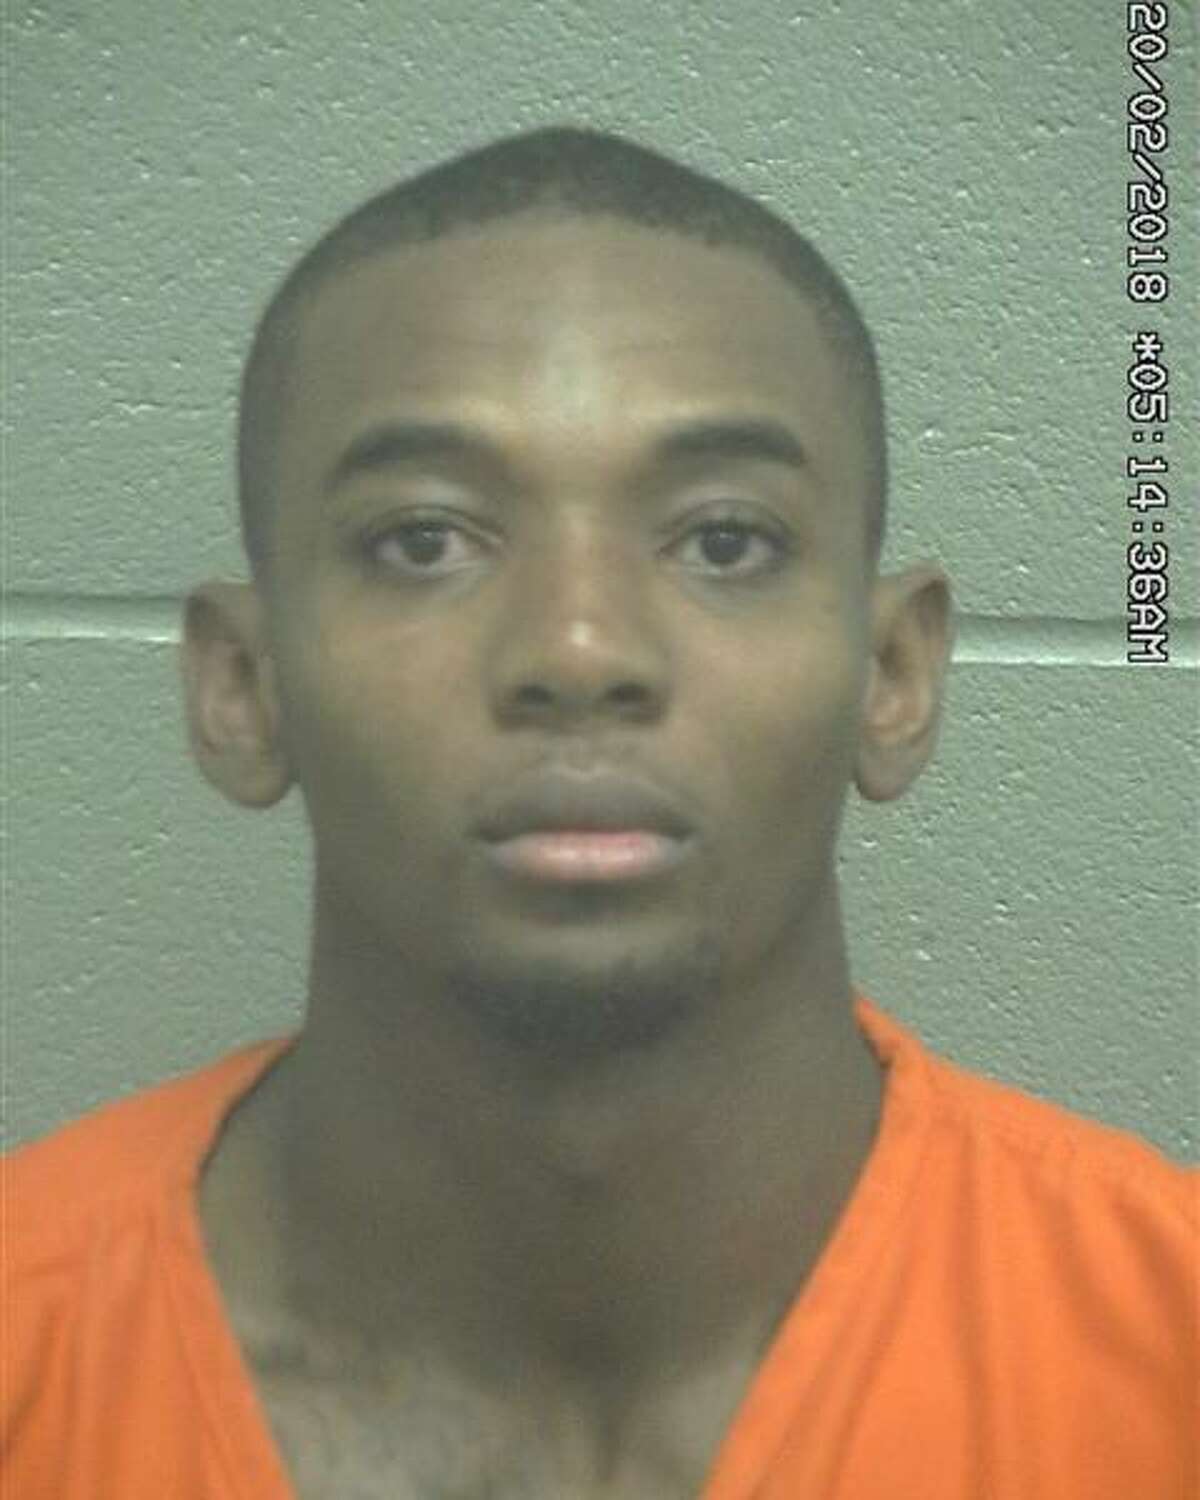 Jevon Travis Thomas, 24 was arrested Feb. 19 after allegedly assaulting a woman, according to court documents.